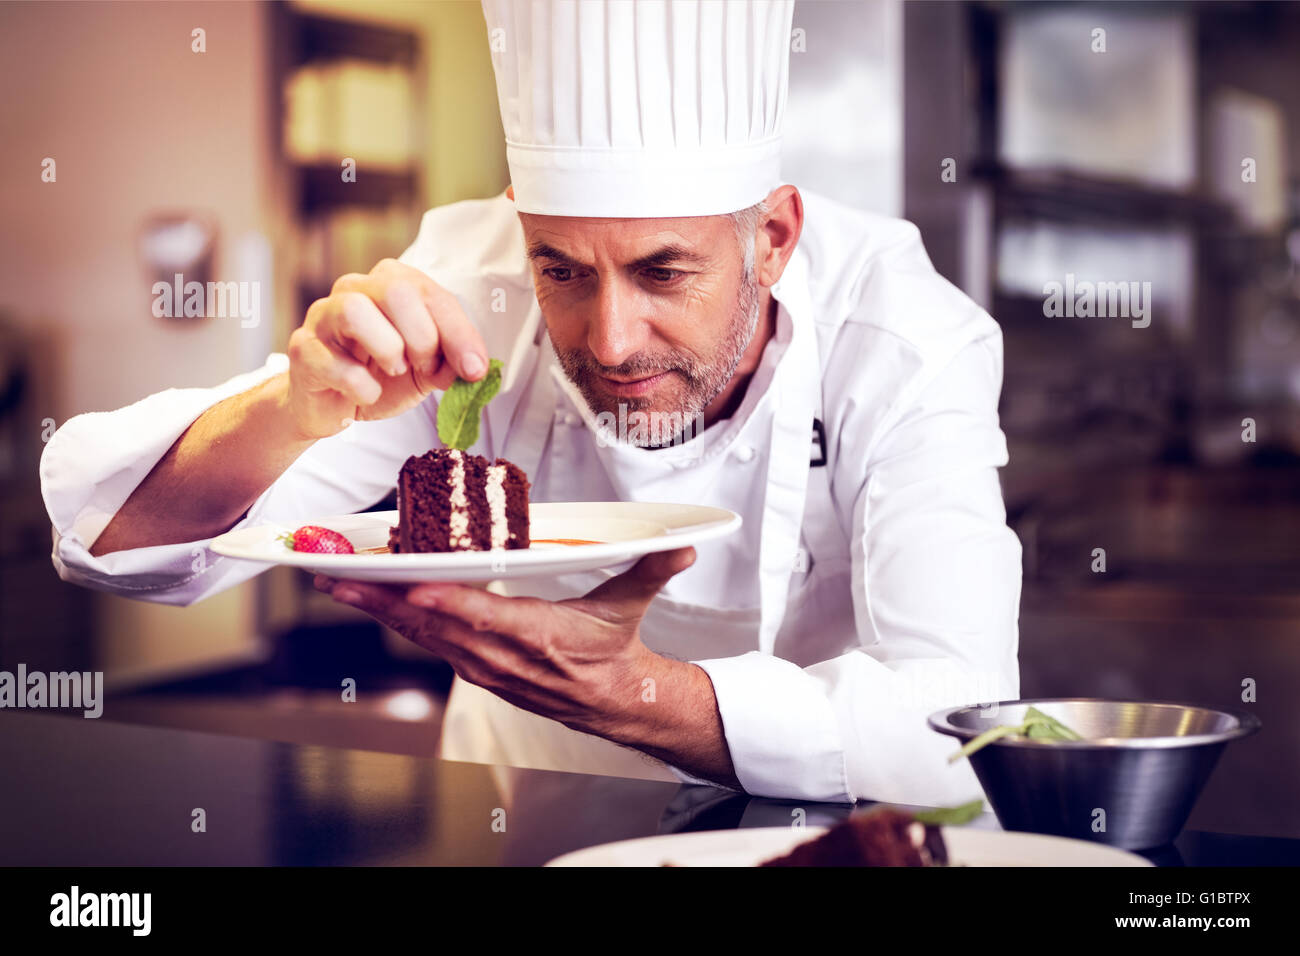 Concentrated male pastry chef decorating dessert in kitchen Stock Photo